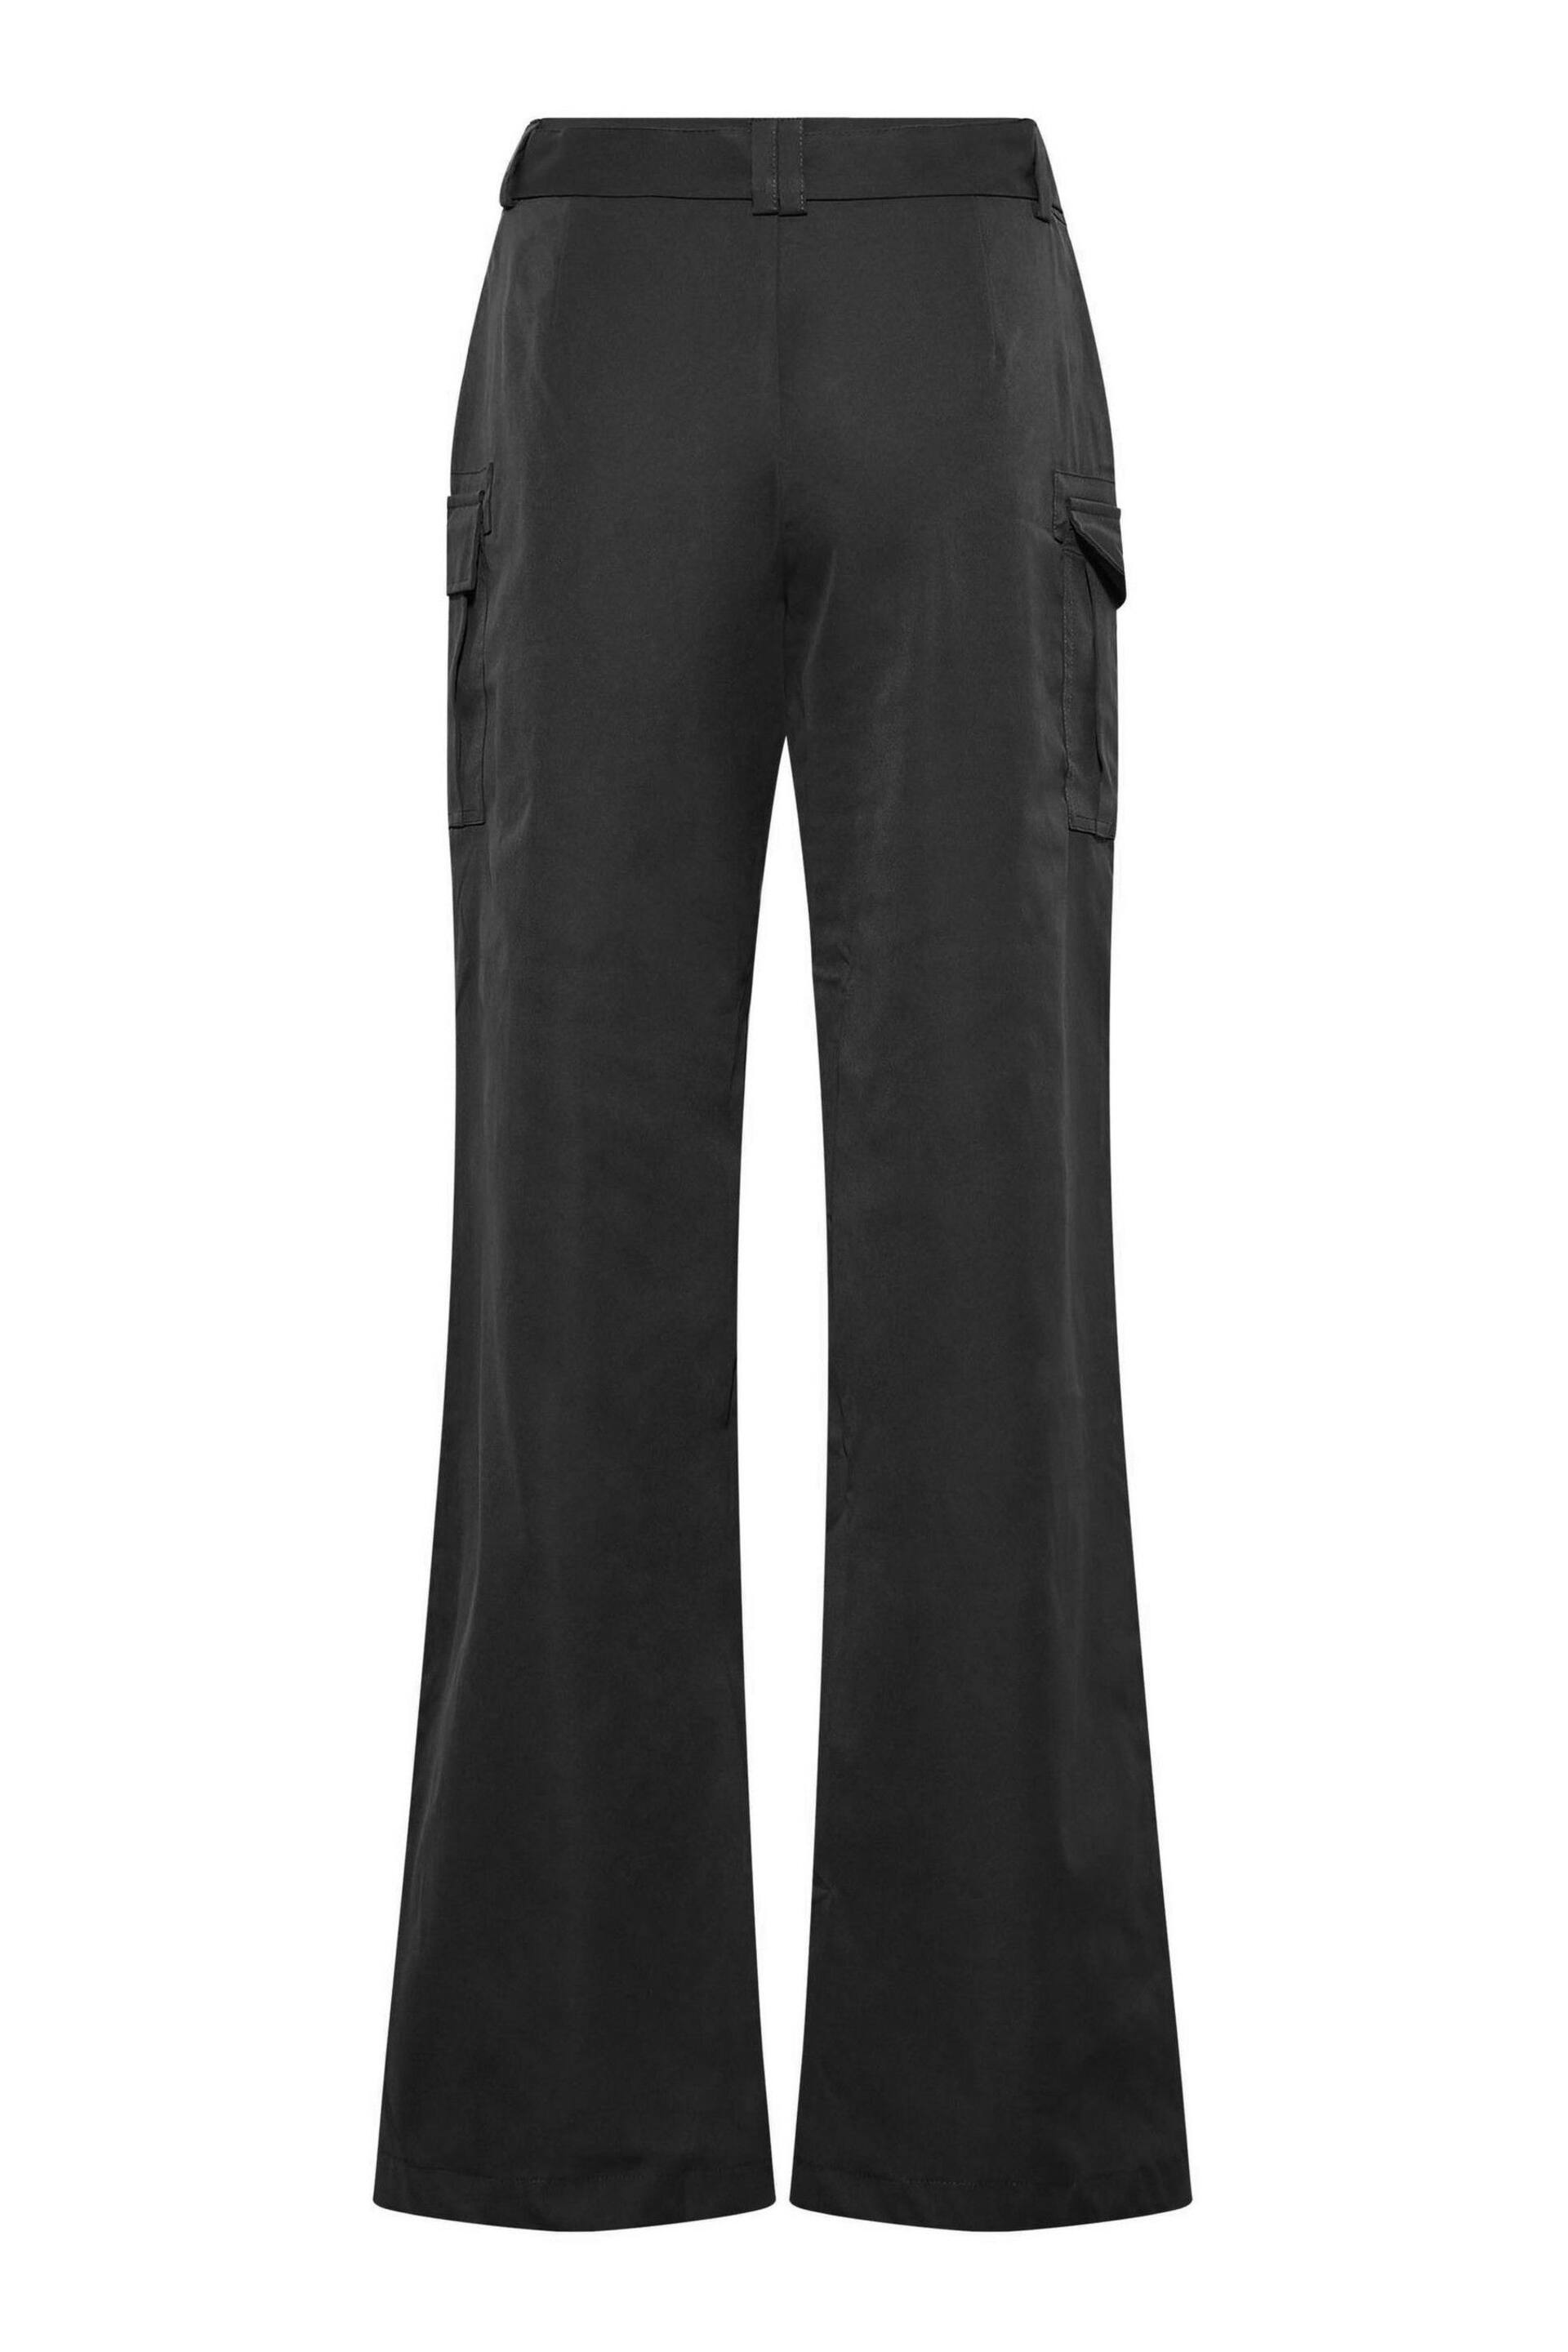 Long Tall Sally Black Belted Wide Leg Cargo Trousers - Image 4 of 4